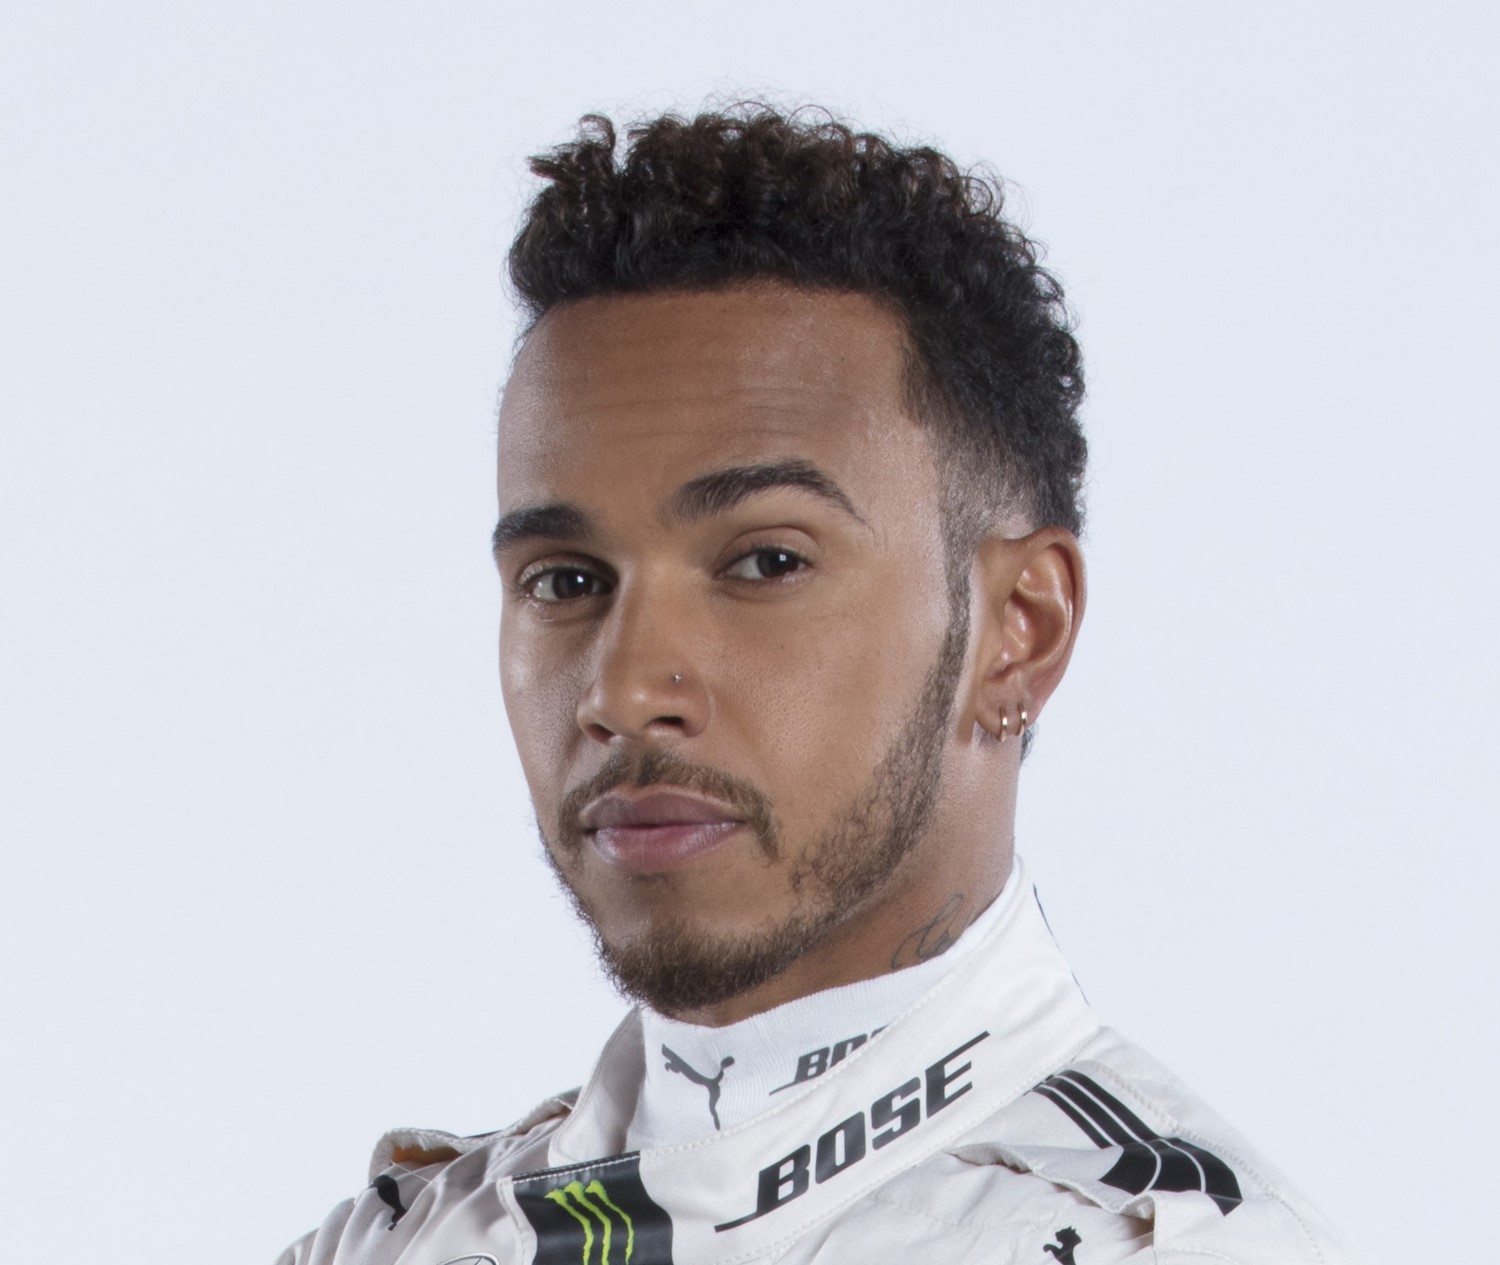 He might try one race, but you won't see Lewis Hamilton full-time in NASCAR